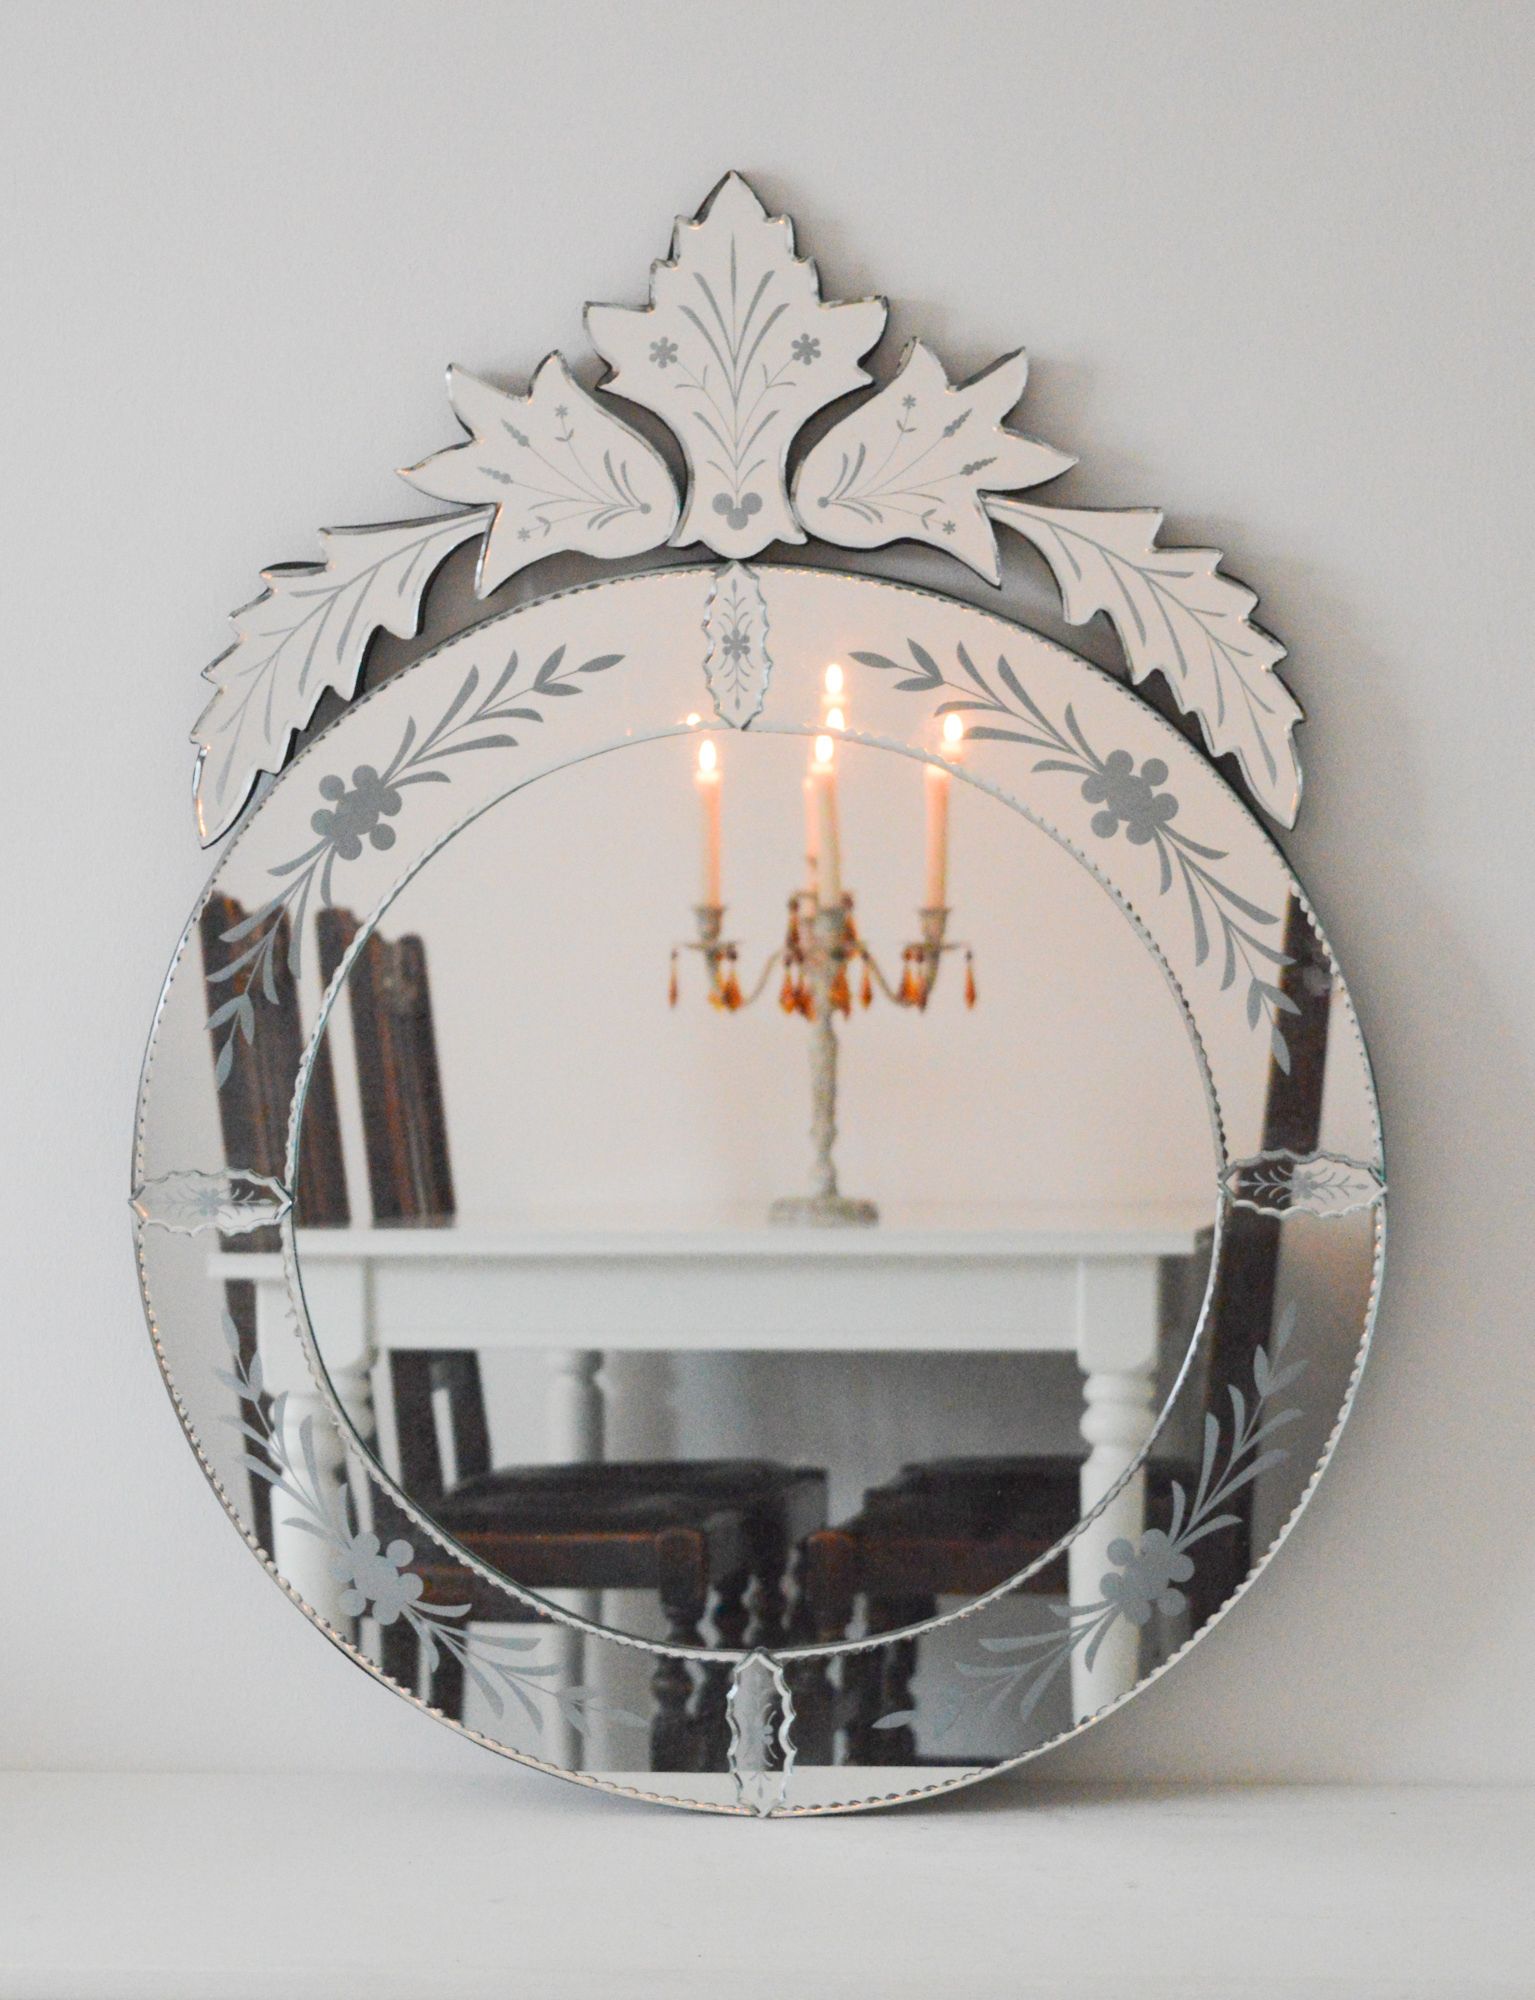 Vintage Venetian Style Wall Mirror, Large Round Decorative Mirror Inside Tellier Accent Wall Mirrors (View 4 of 15)